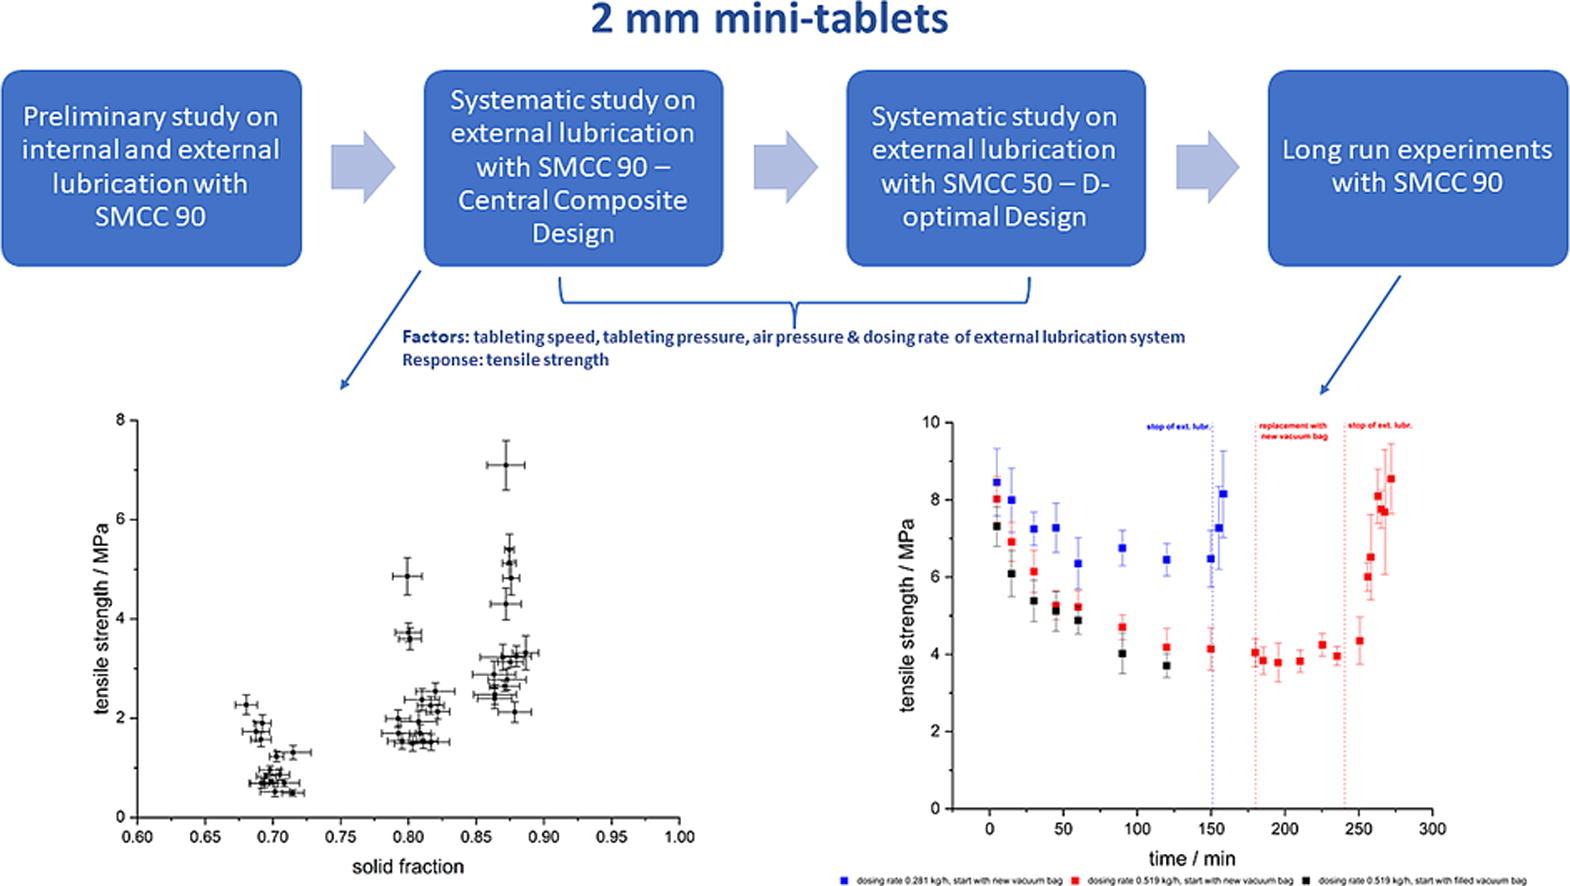 A systematic investigation of external lubrication of mini-tablets on a rotary tablet press with focus on the tensile strength